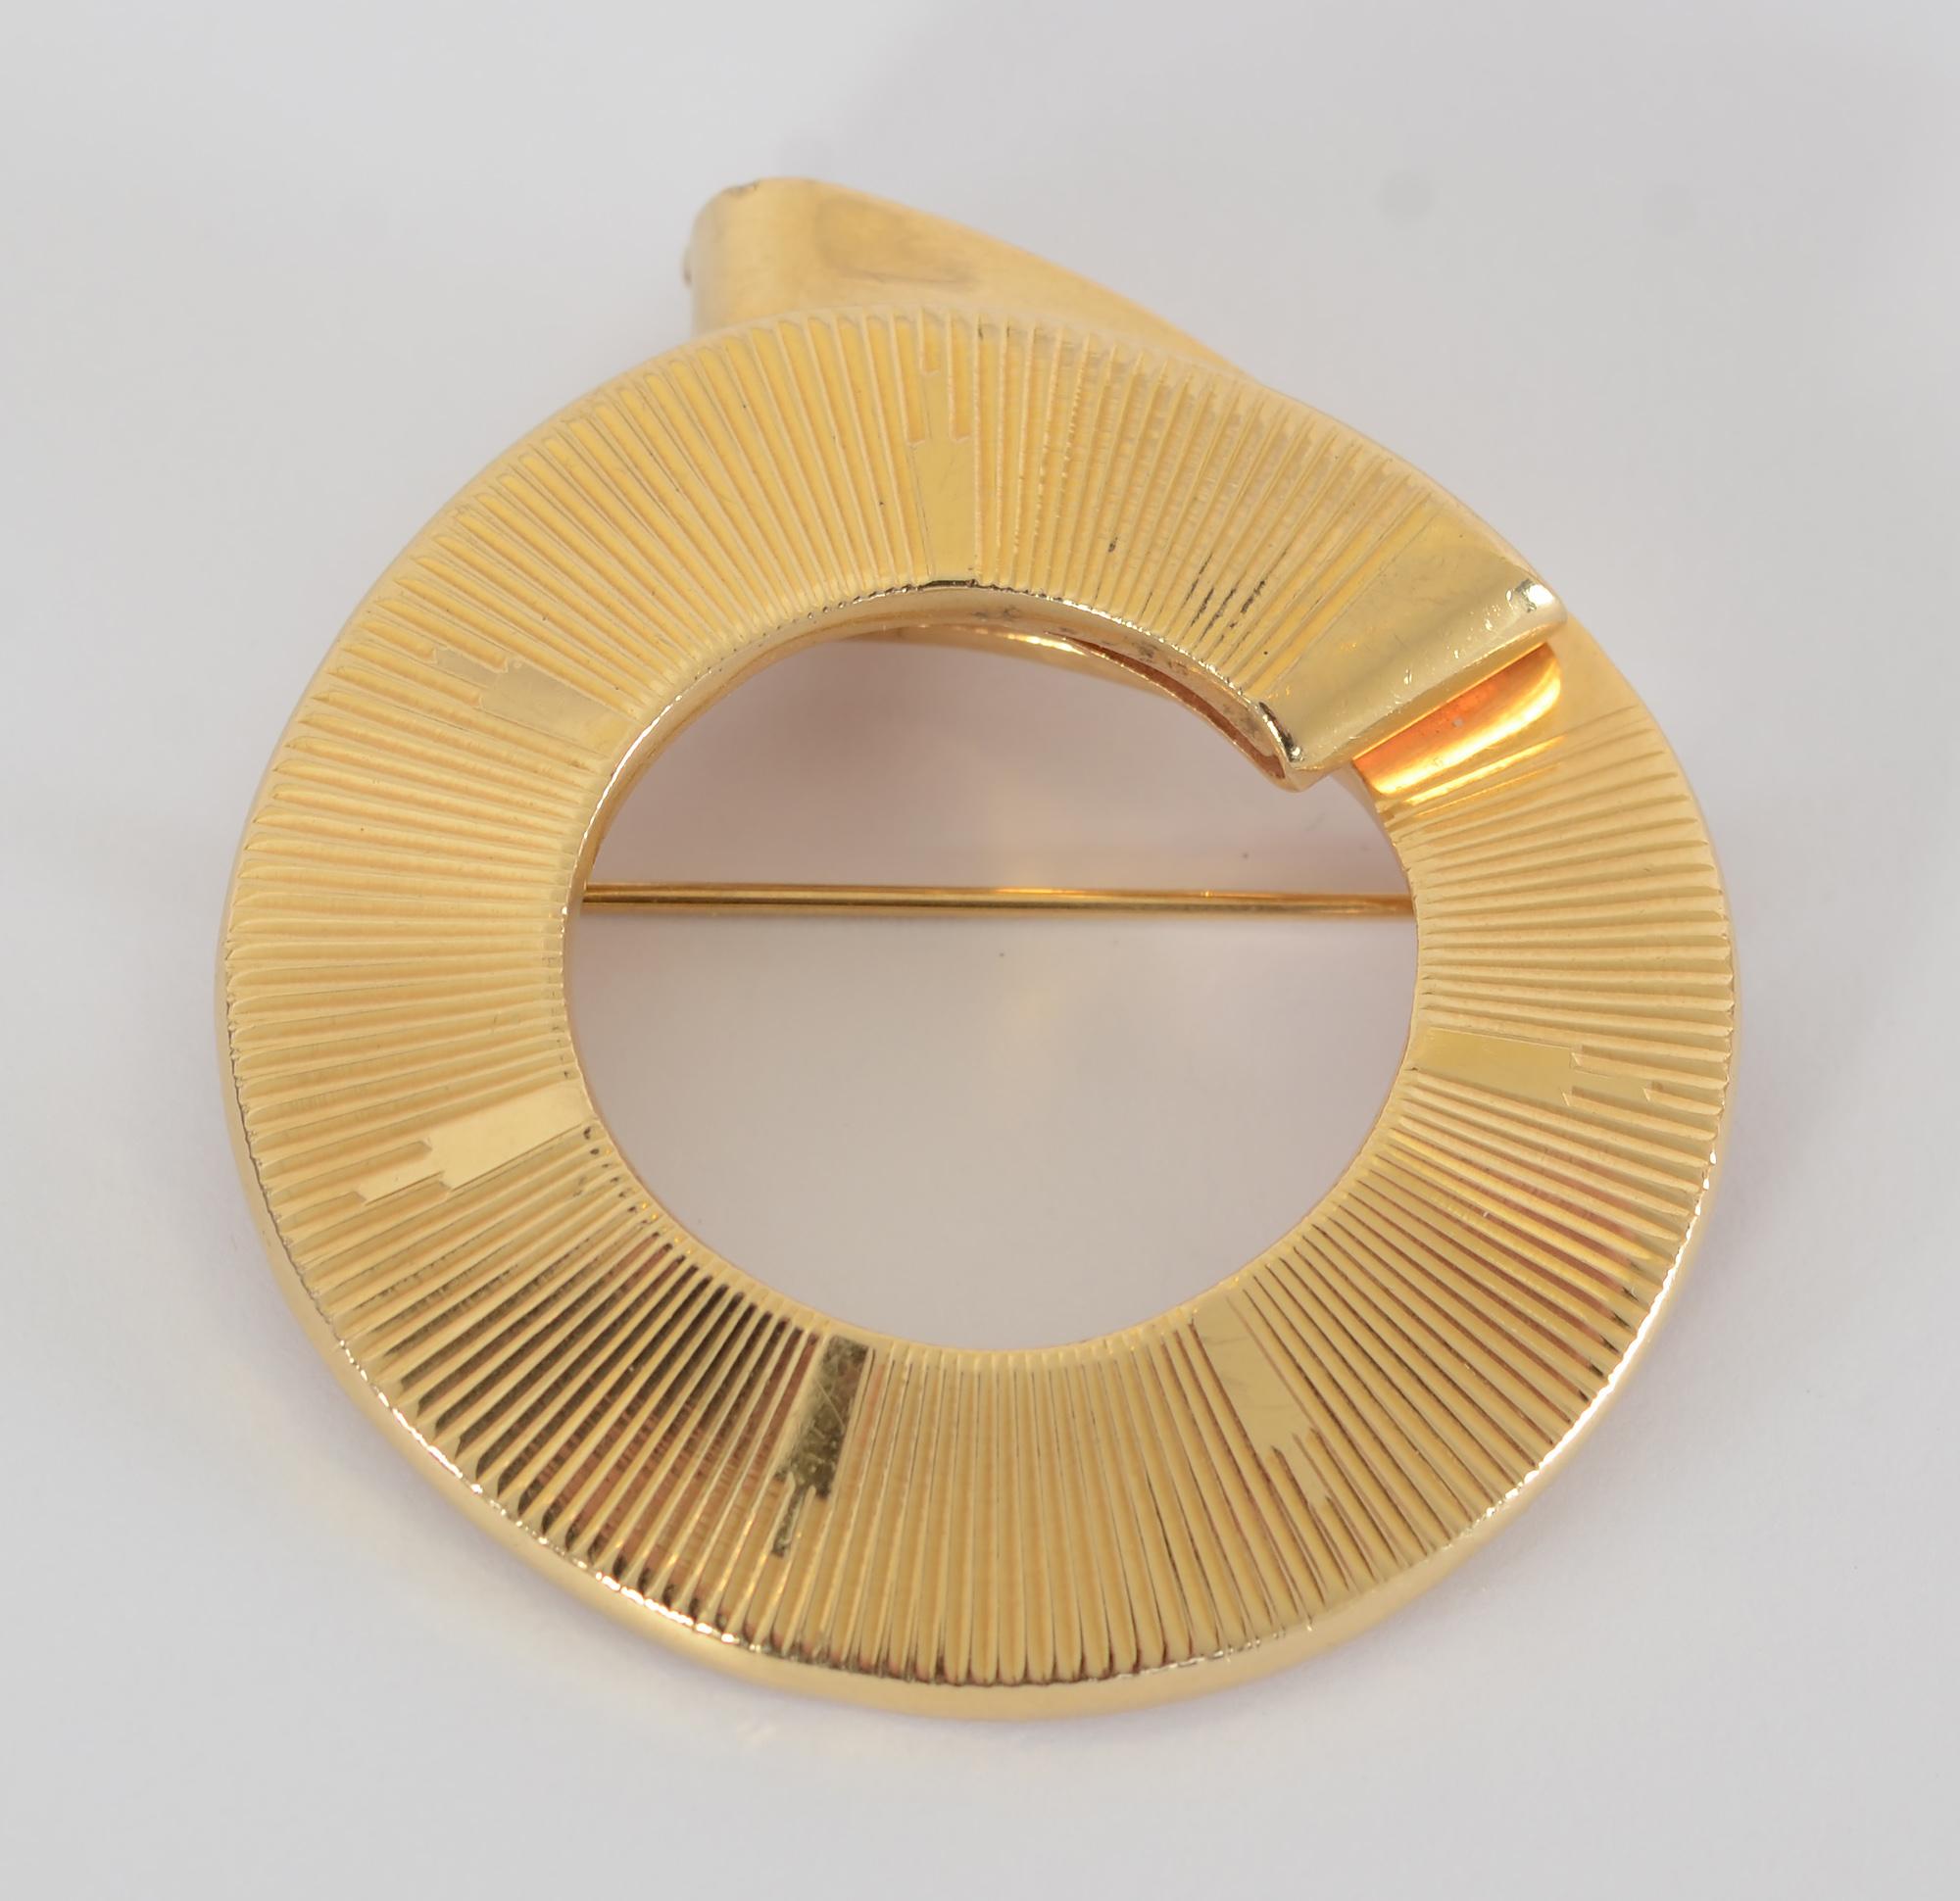 Retro 14 karat gold circle pin by Nadia Buckley (Born Countess Nadja Ostrovska in Rome) . Buckley was one of the few outstanding women in the field of jewelry design in the mid 20th century. She had stores in New York and Dallas. Her pieces were